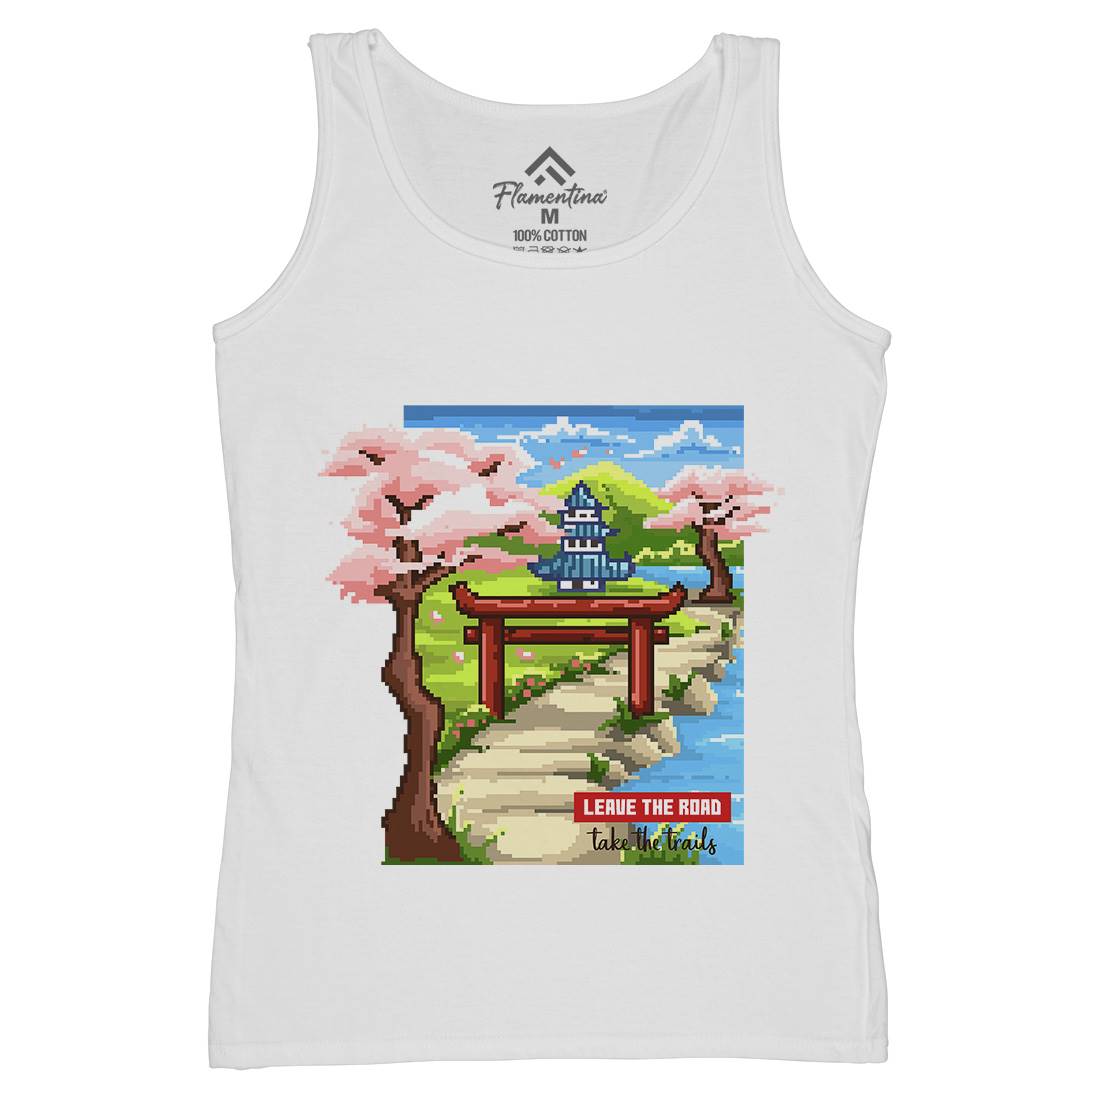 Leave The Roads Take The Trails Womens Organic Tank Top Vest Nature B924